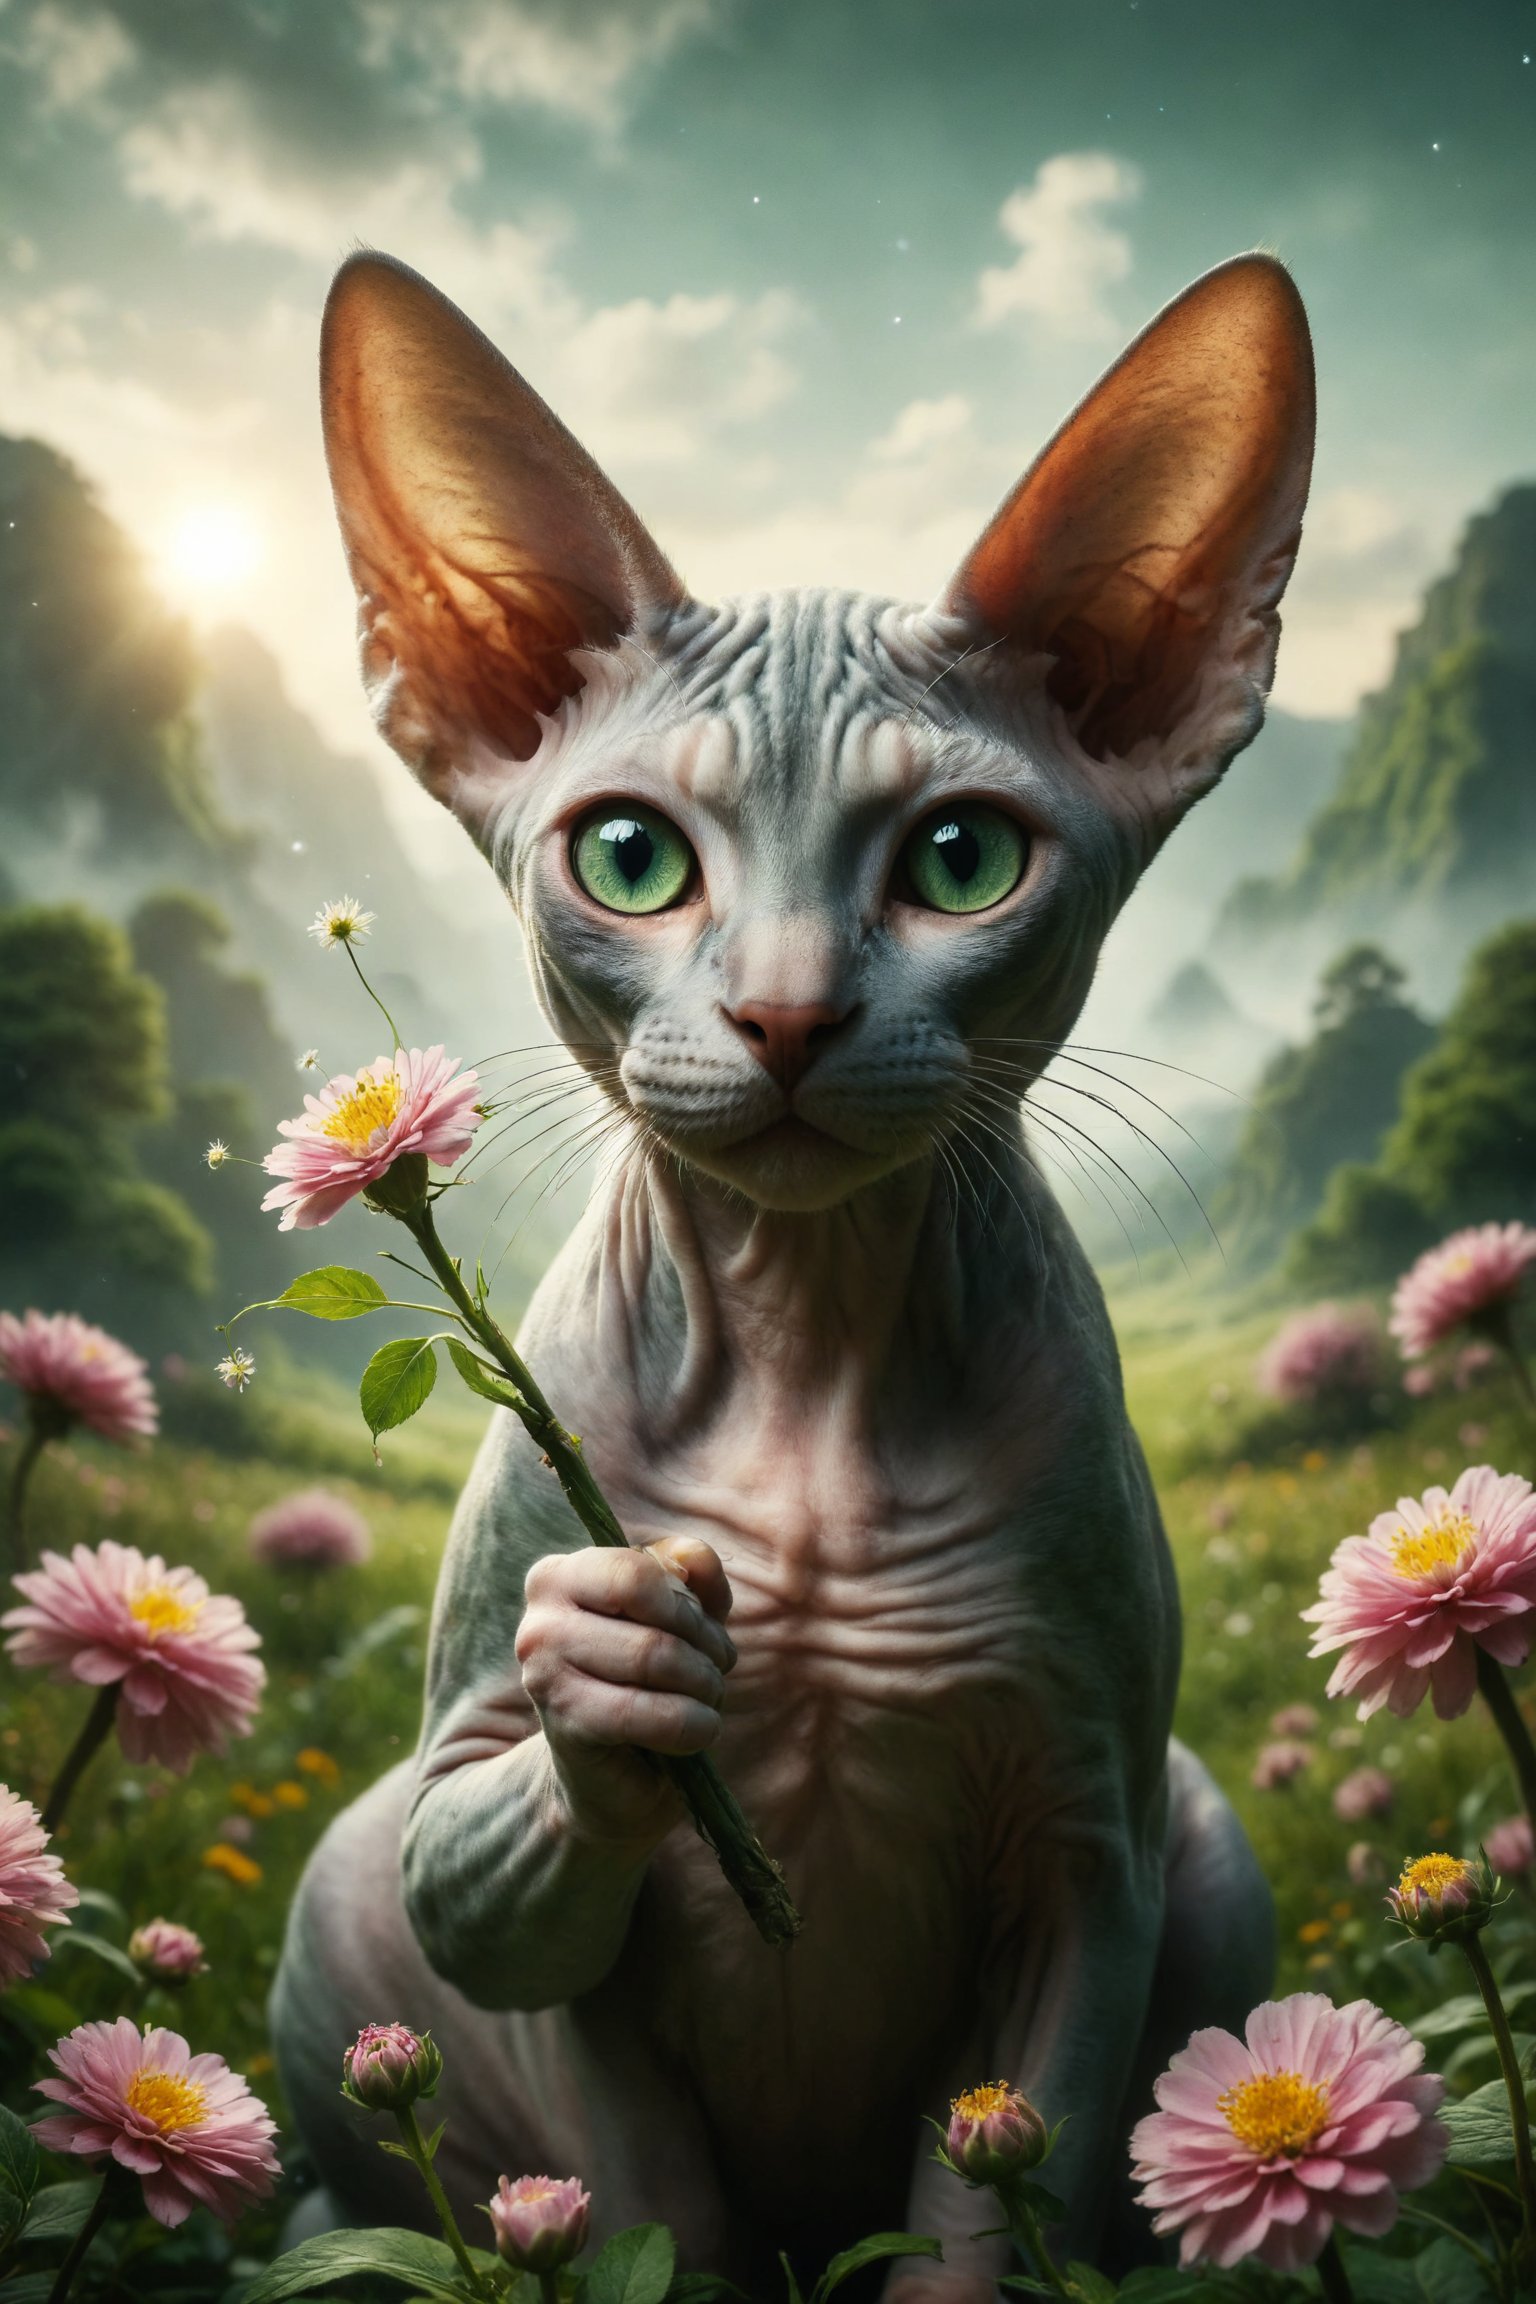 Create an image of a Sphynx cat holding a flowering wand over a green landscape, symbolizing the beginning of new ideas, projects, and creativity.